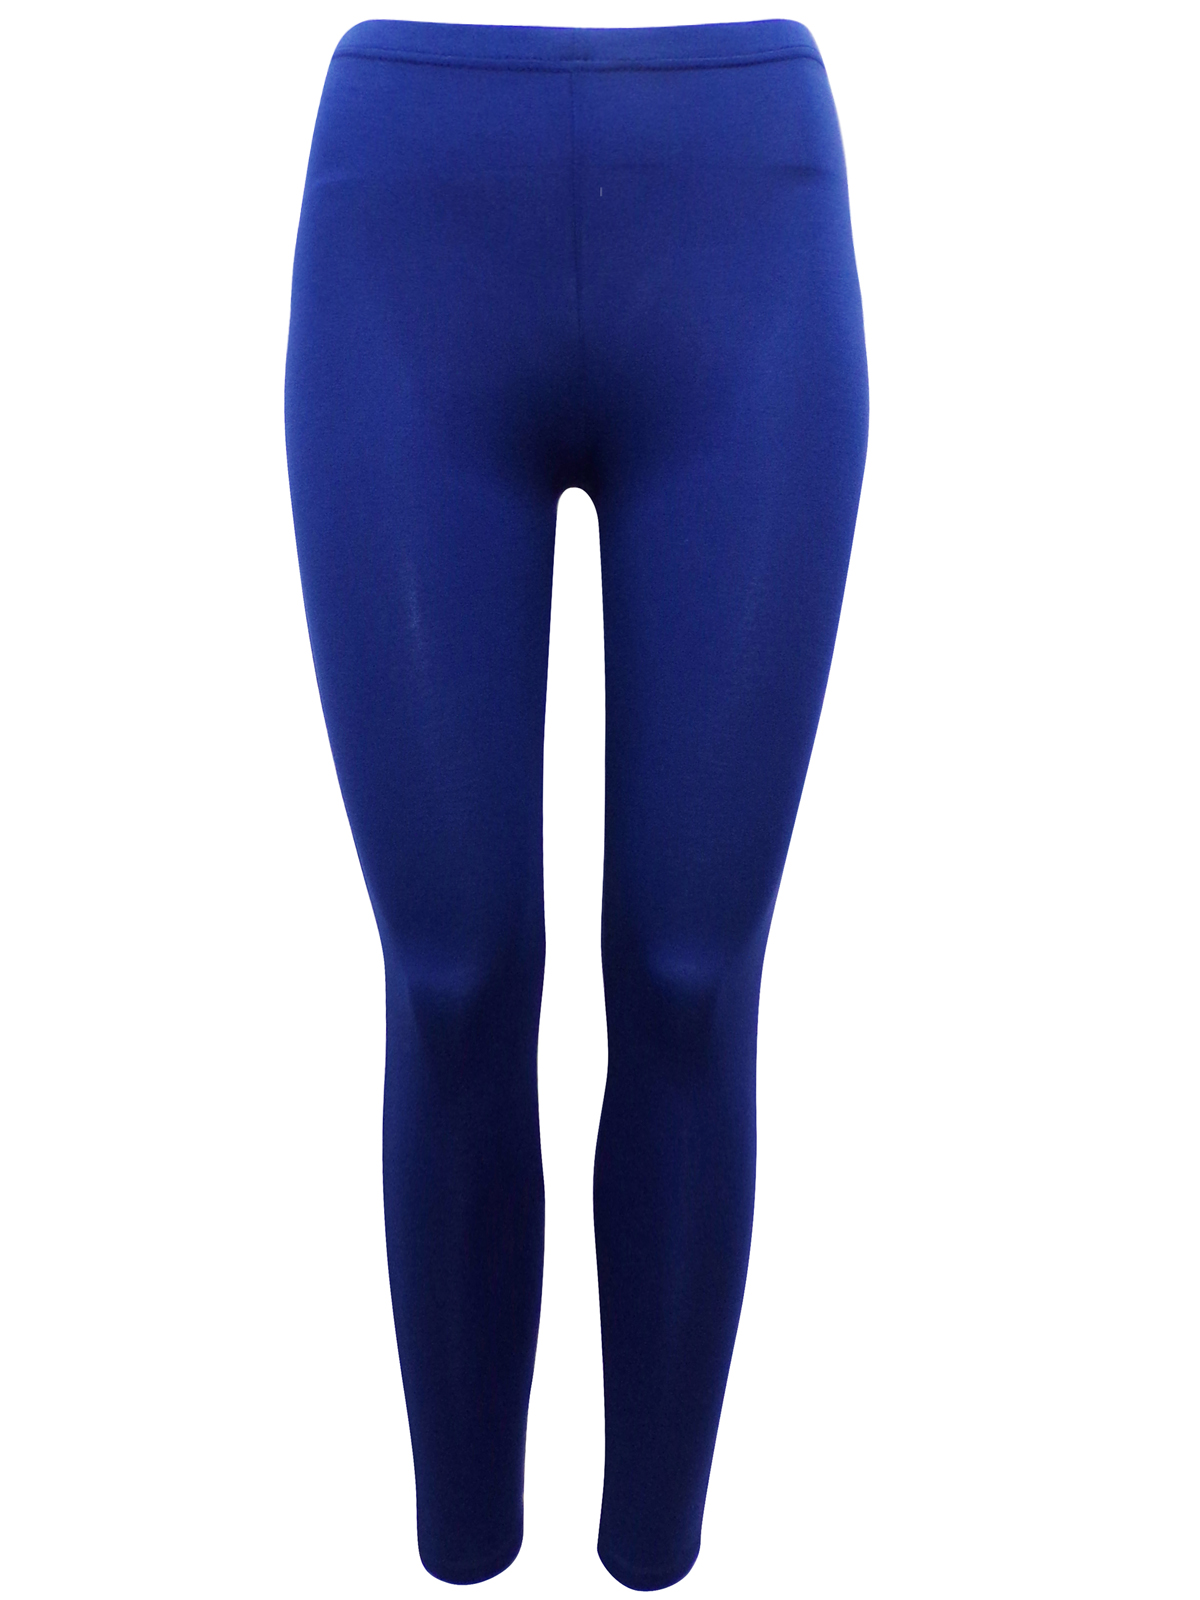 //text.. - - BLUE Full Length Jersey Leggings - Size 10 to 18